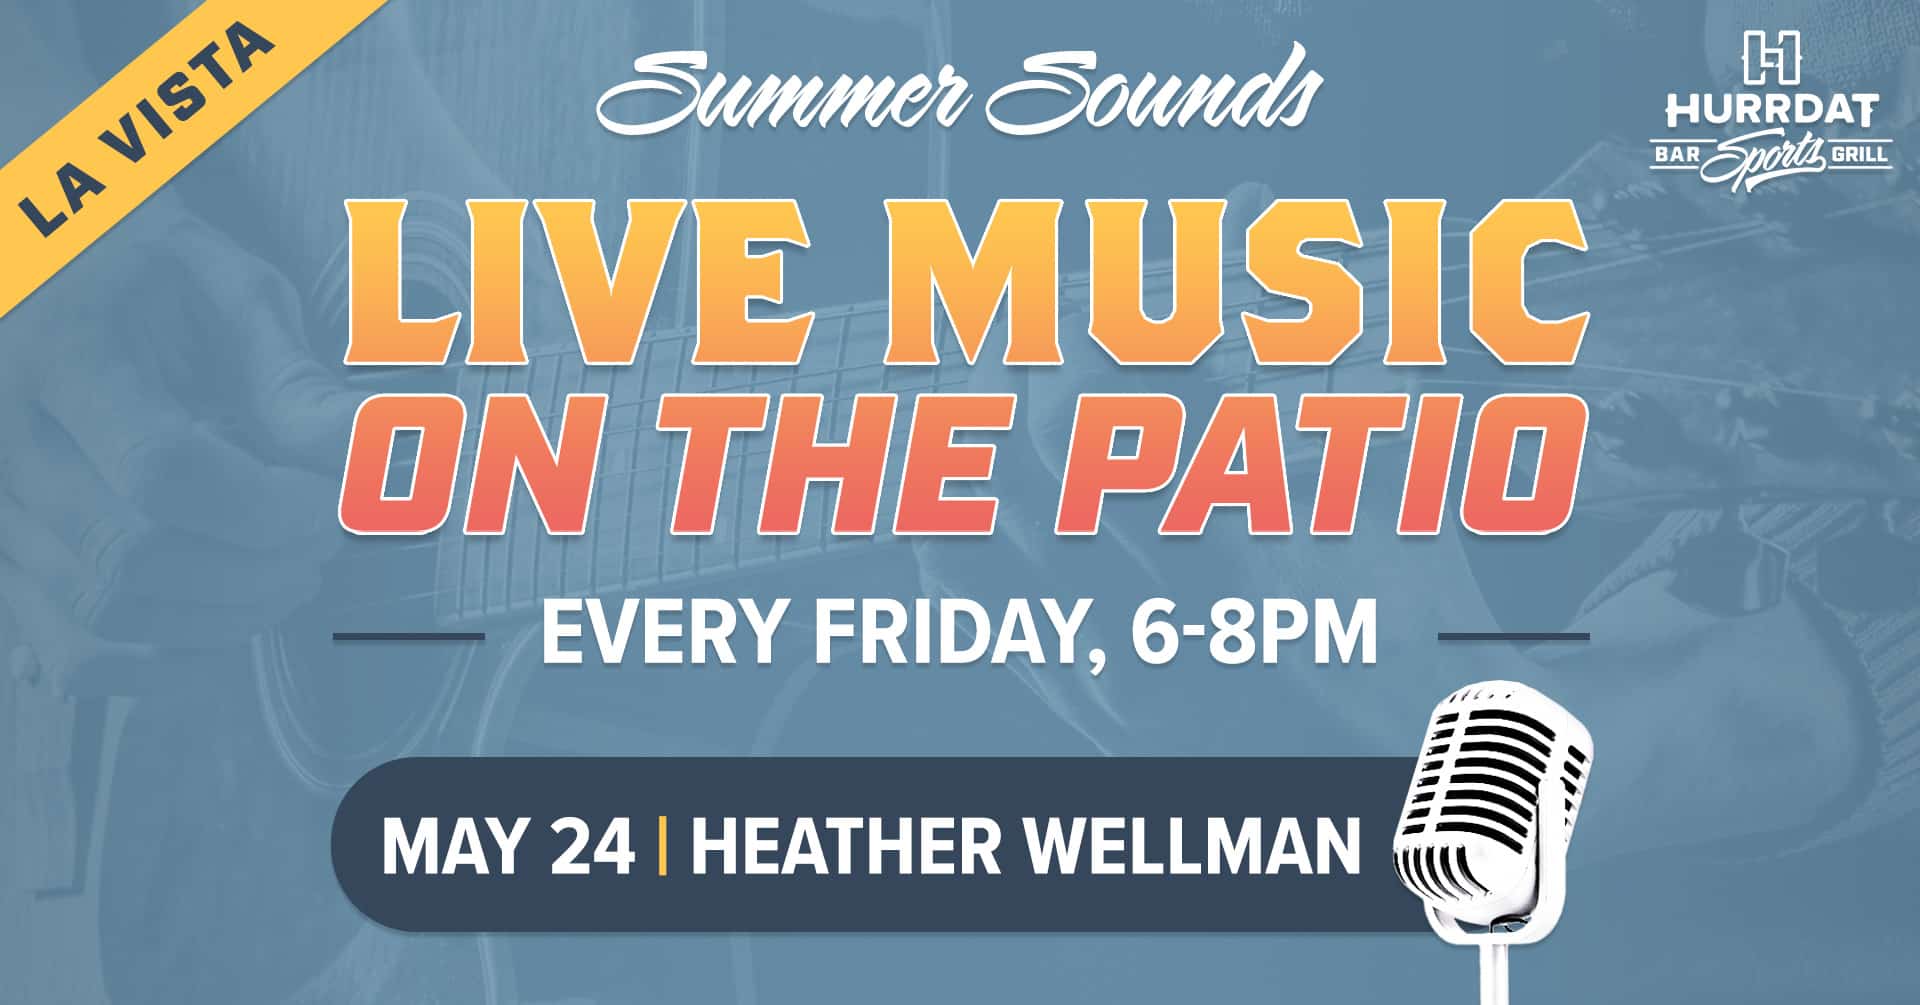 Live Music Summer Sounds at Hurrdat Sports Bar on the Patio